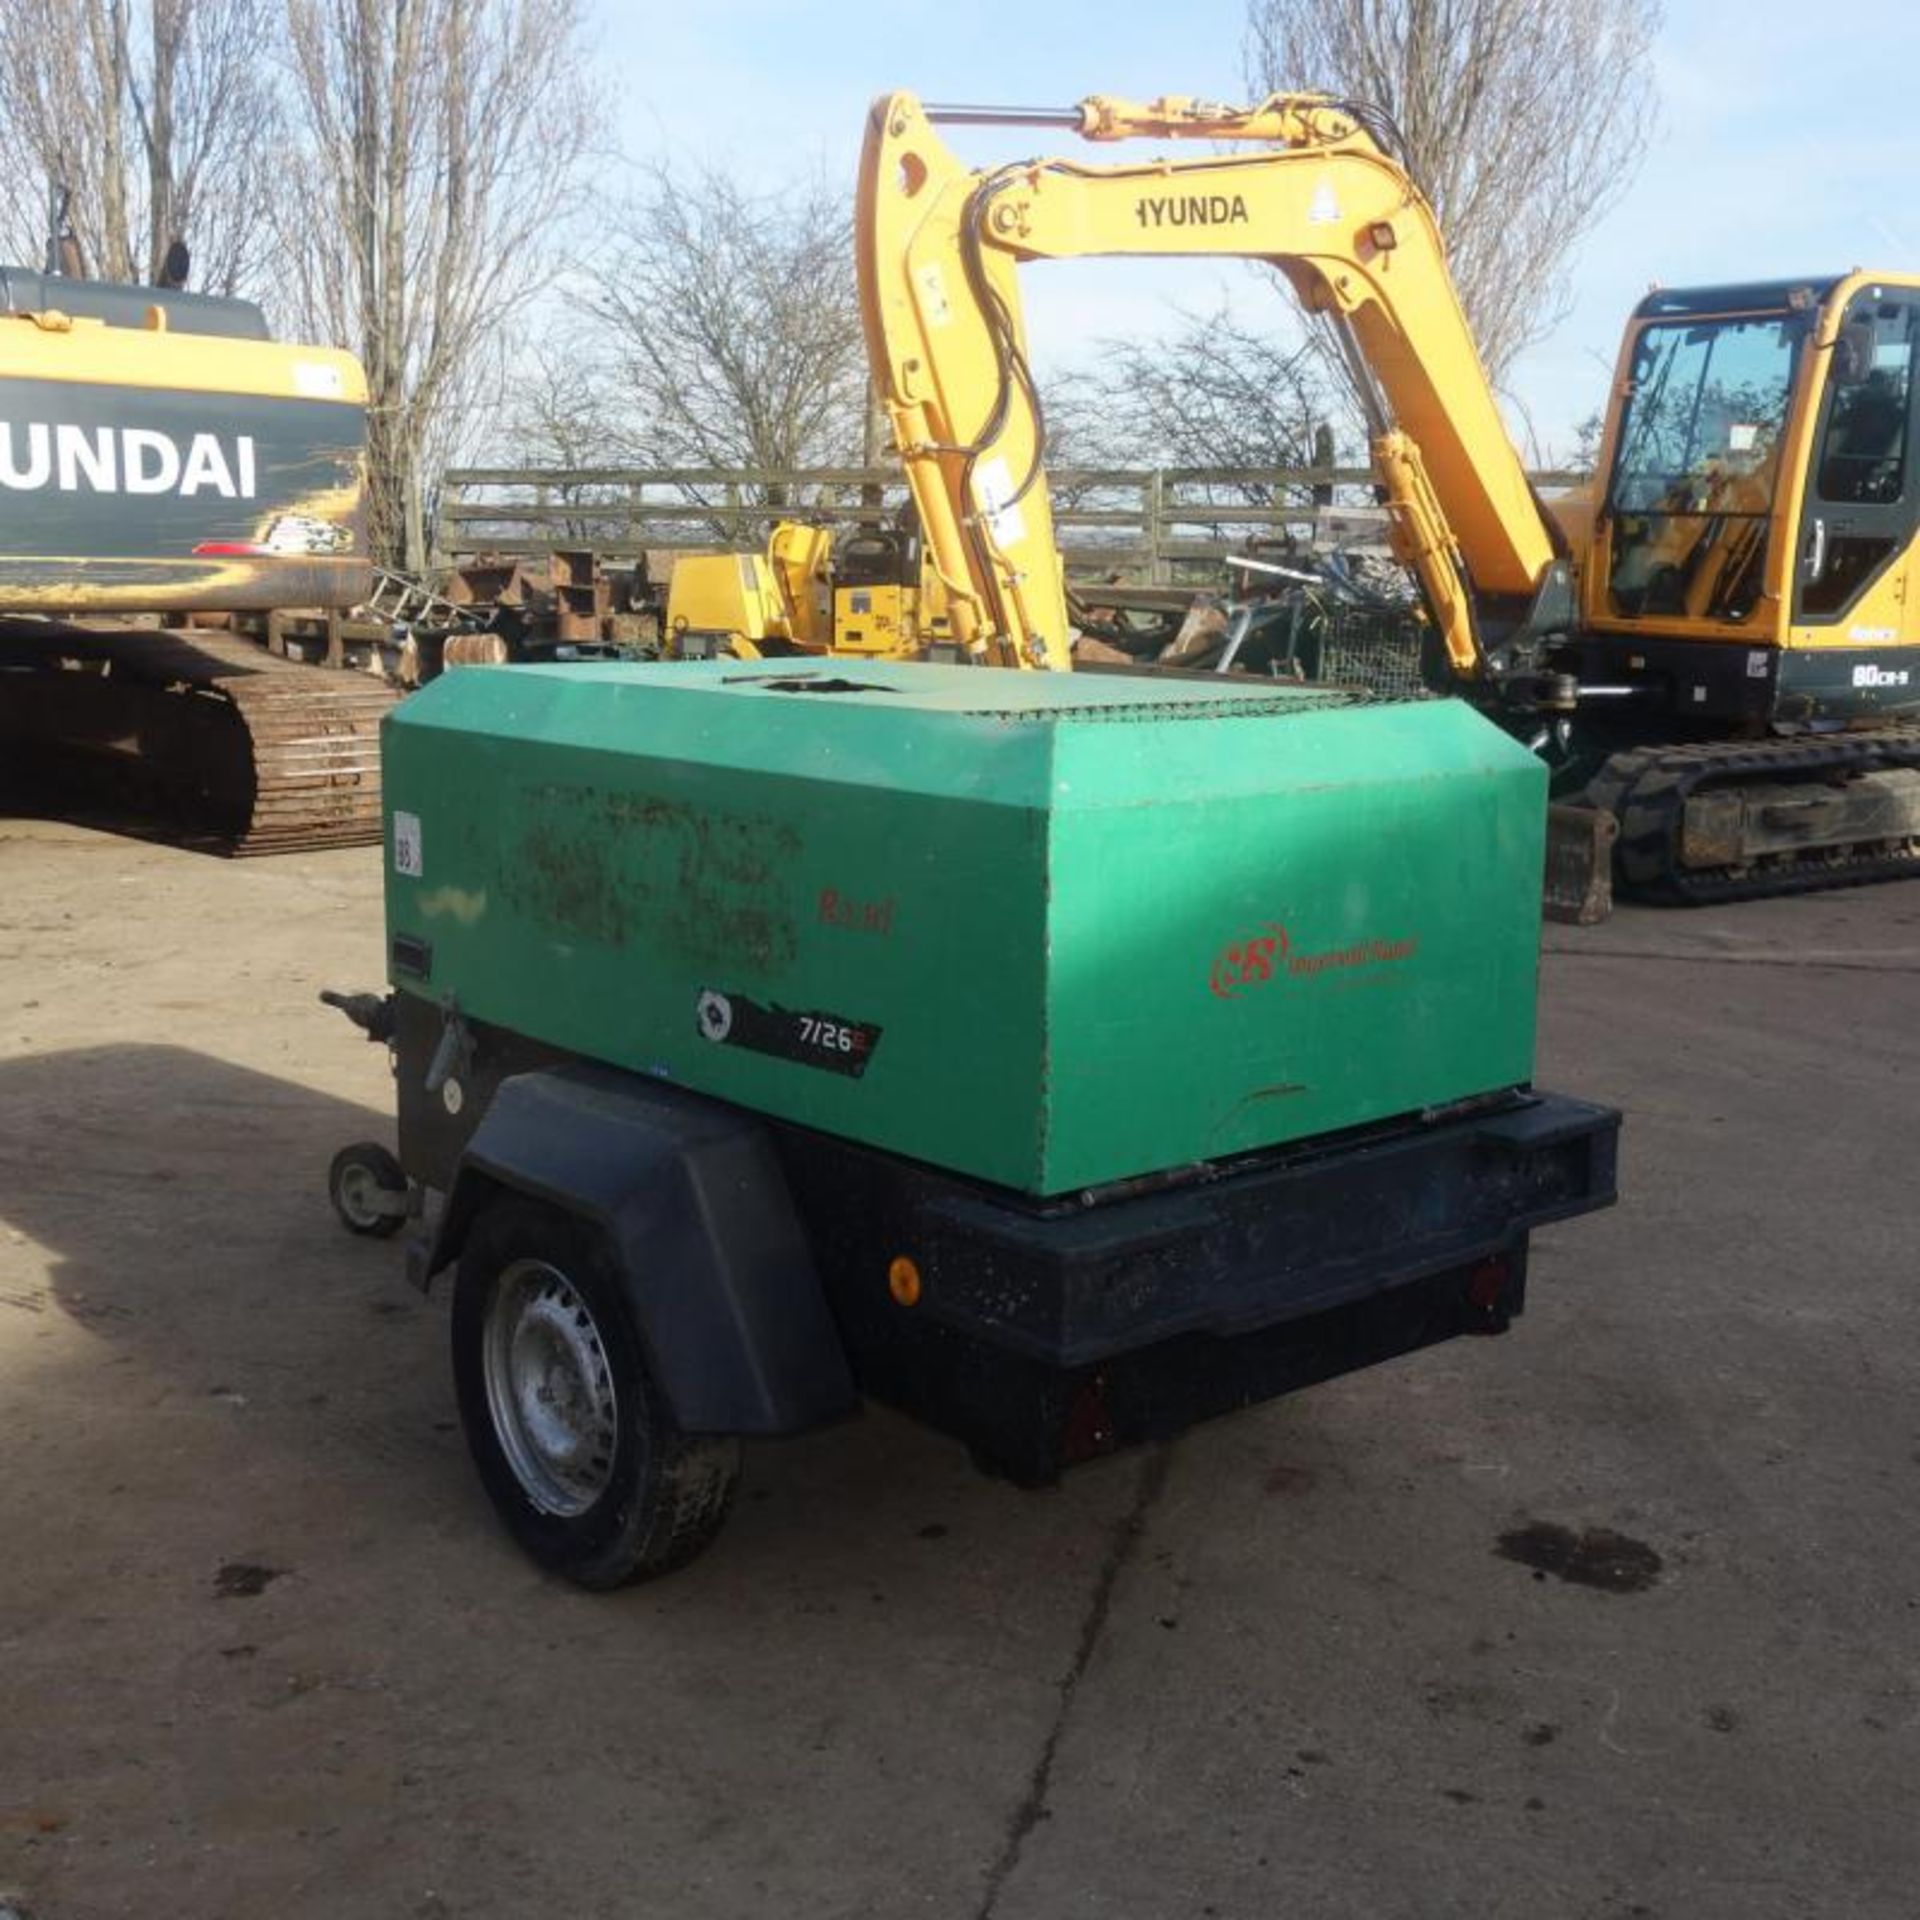 2006 Inersollrand 726e Compressor, Only 3702 Hours From New - Bild 3 aus 5